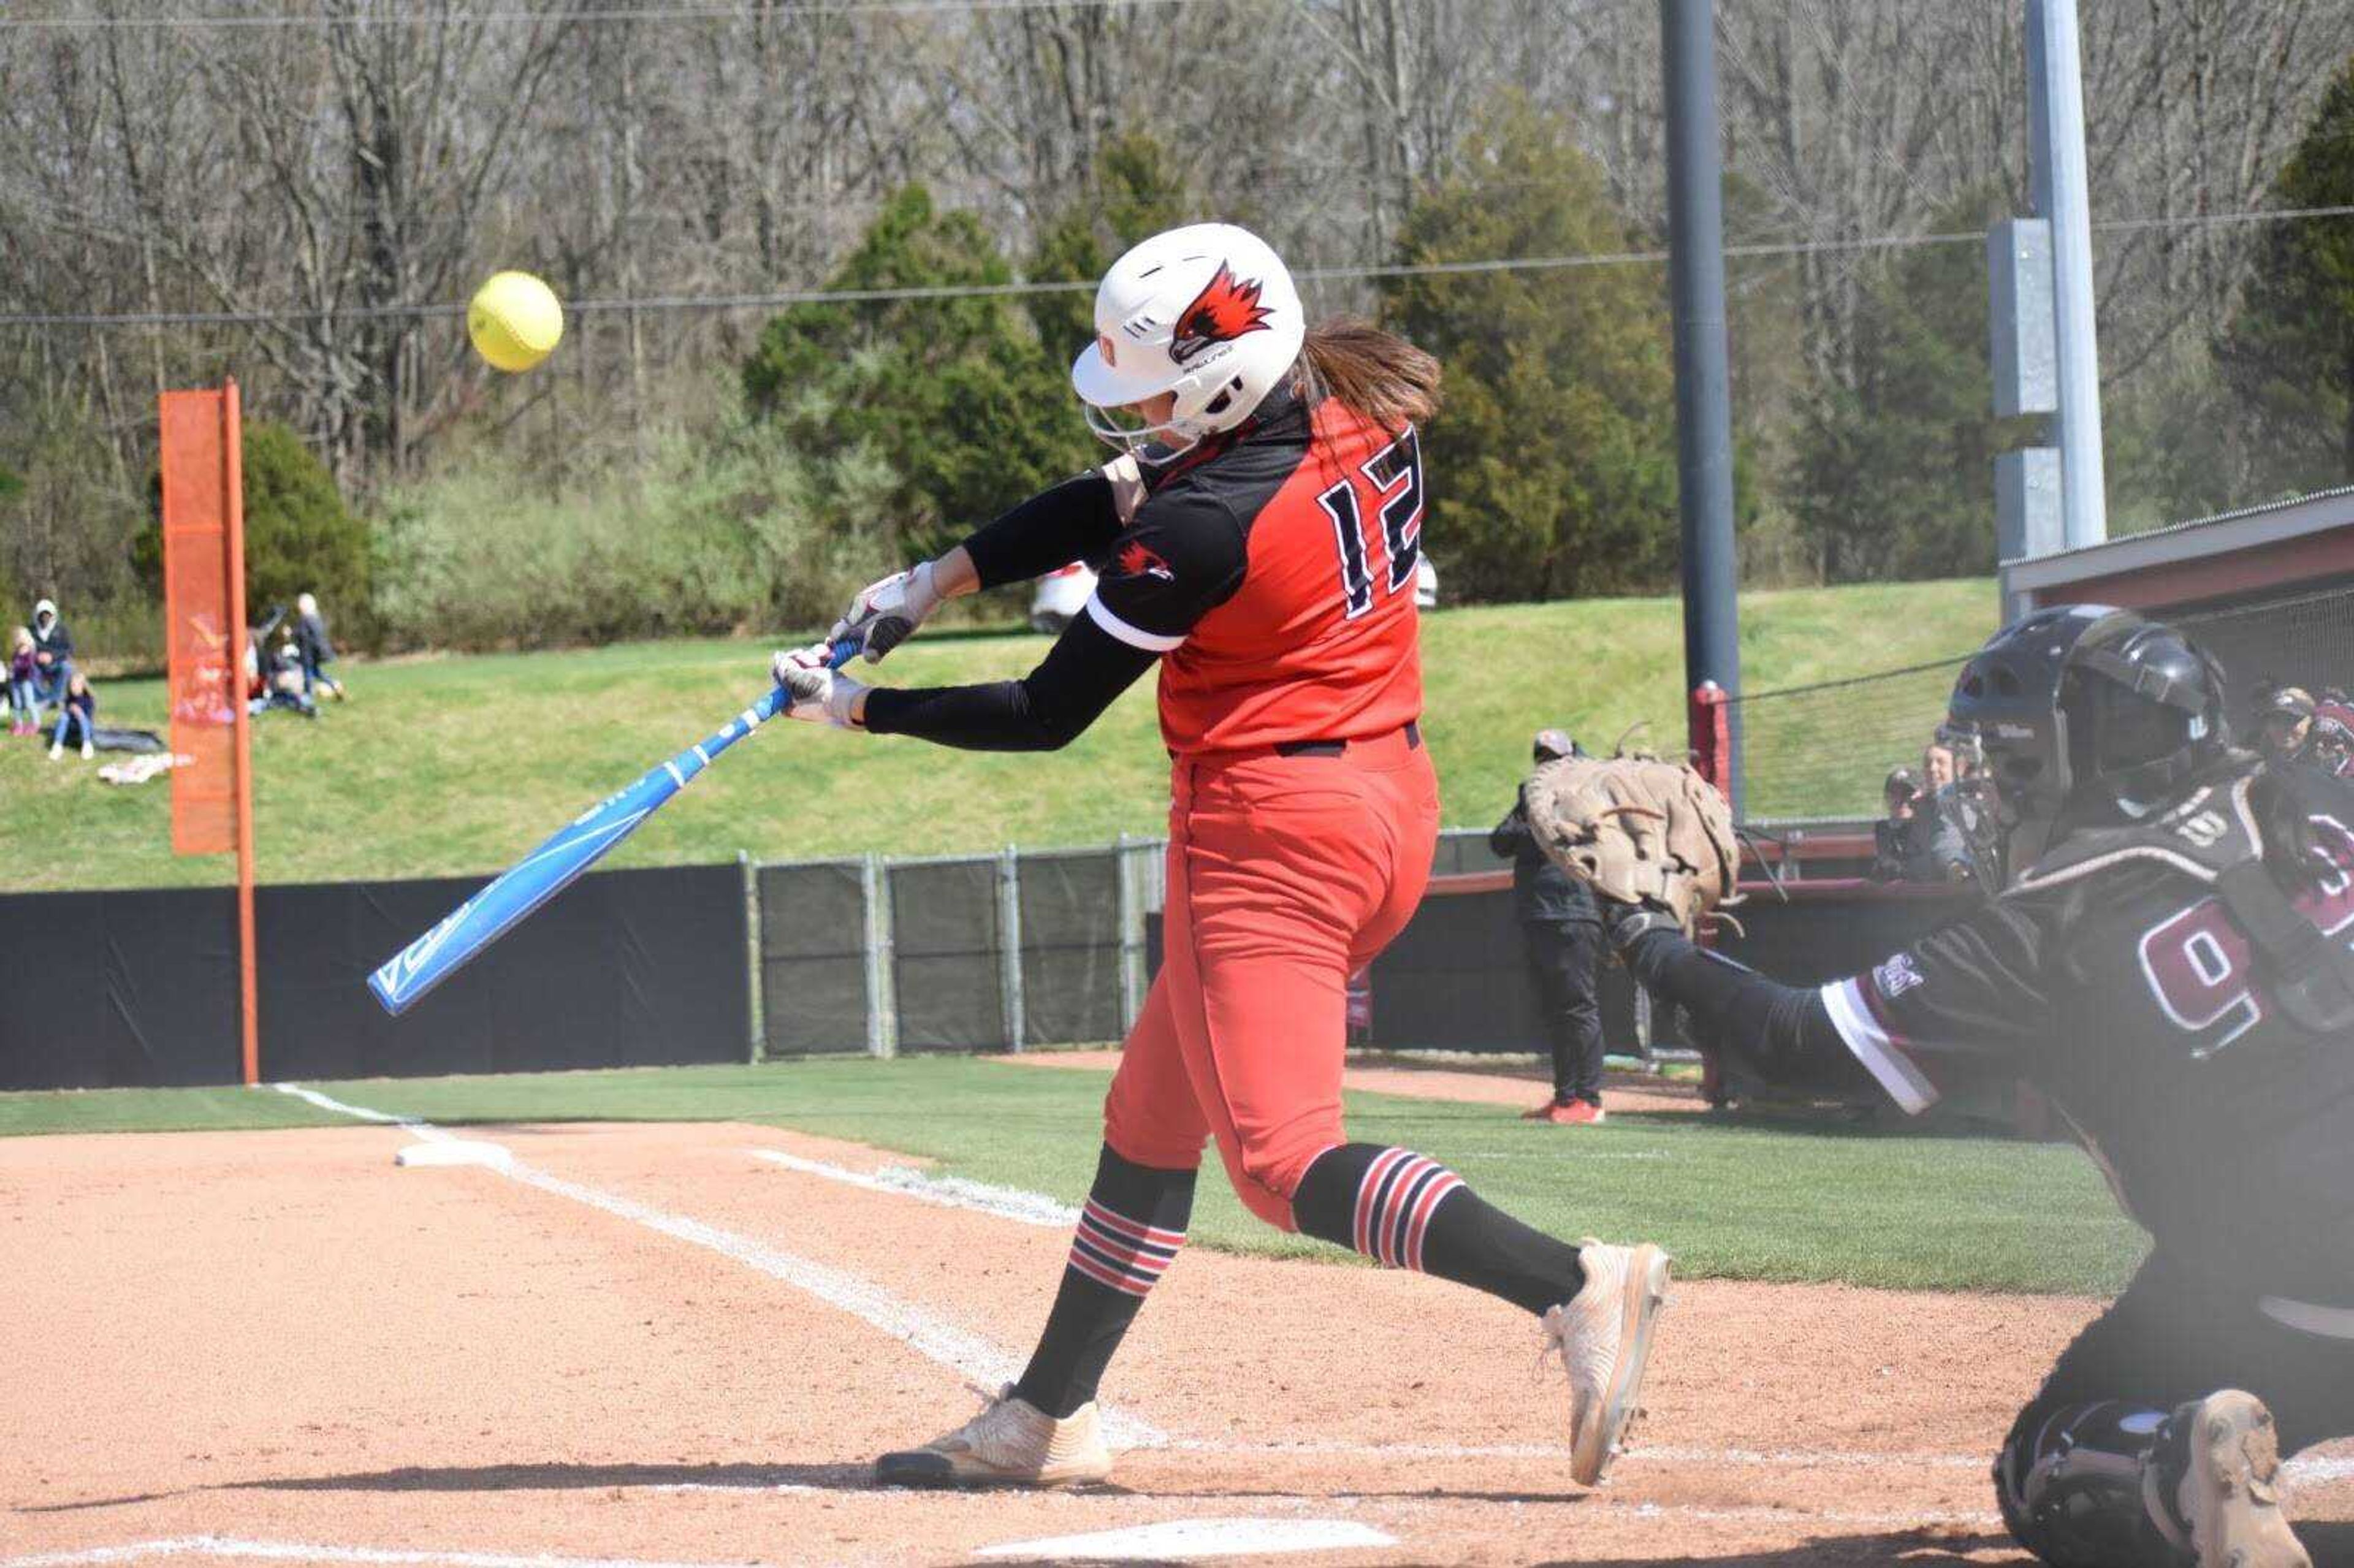 Freshman infielder Katie Dreiling takes a swing during Southeast's 5-0 win over Southern Illinois on March 31 at the Southeast Softball Complex in Cape Girardeau.